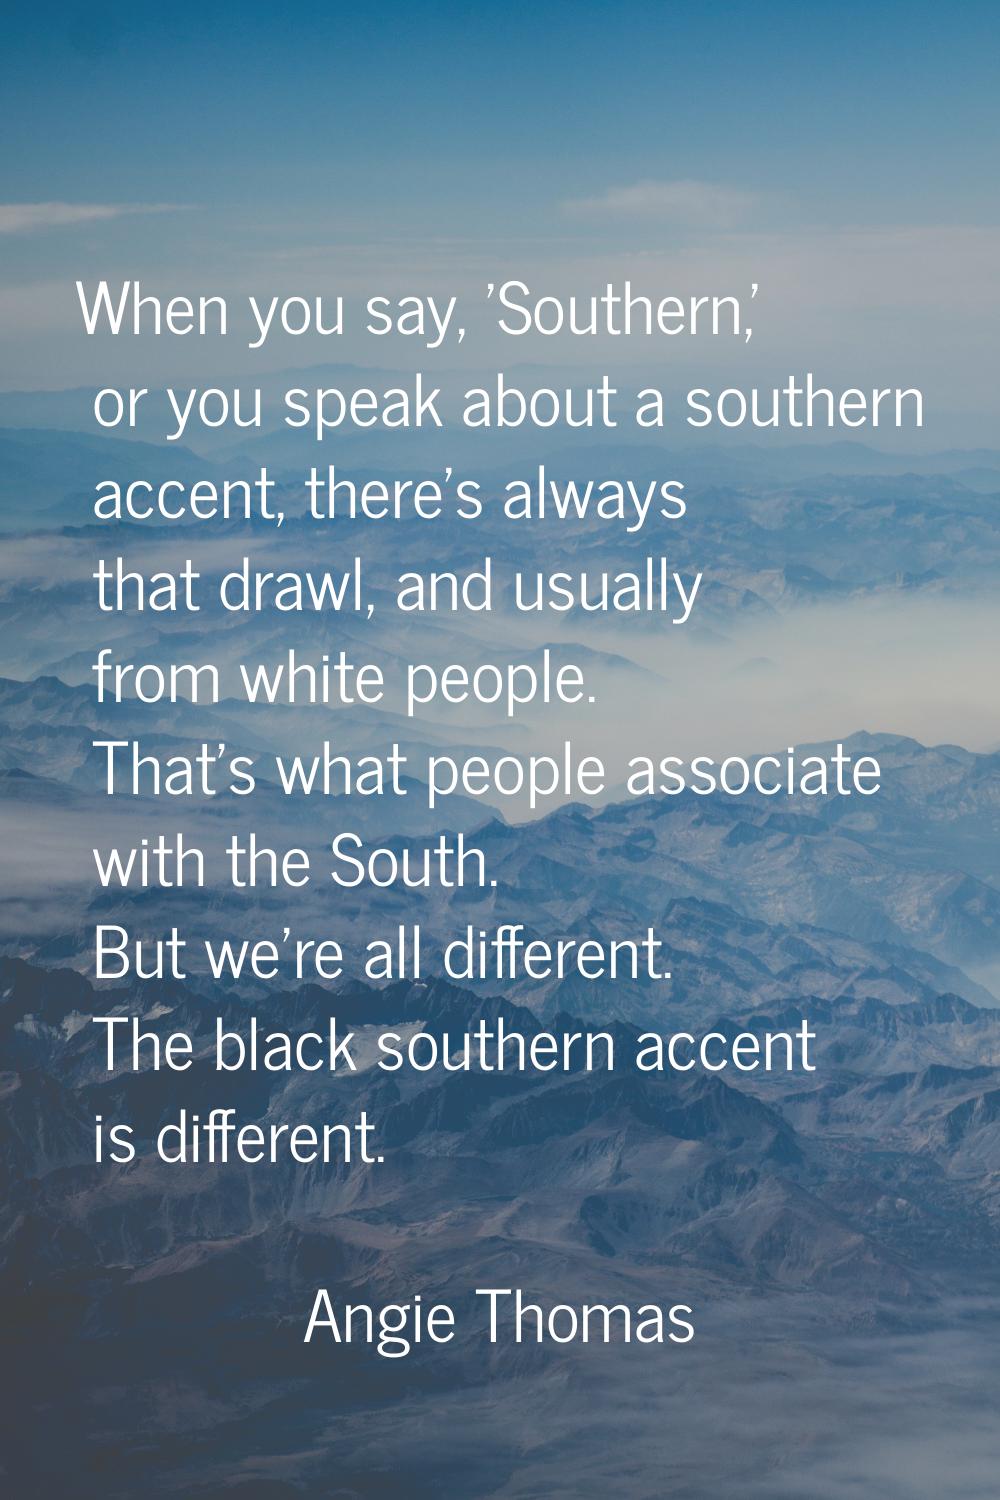 When you say, 'Southern,' or you speak about a southern accent, there's always that drawl, and usua